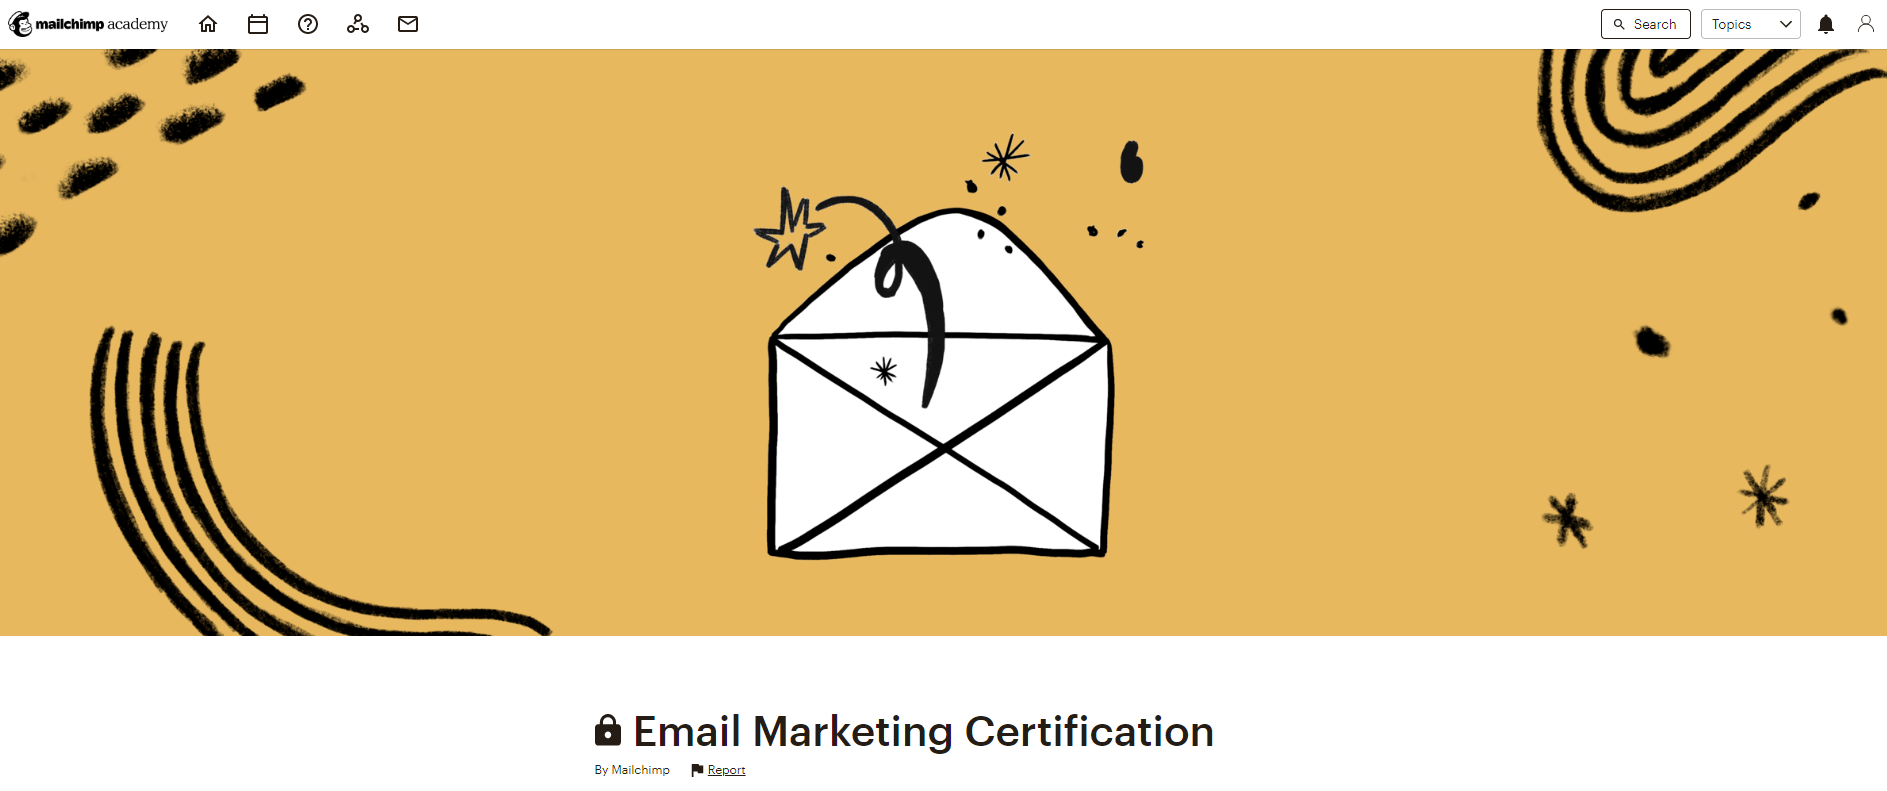 screenshot of Mailchimp Academy’s email marketing certification course